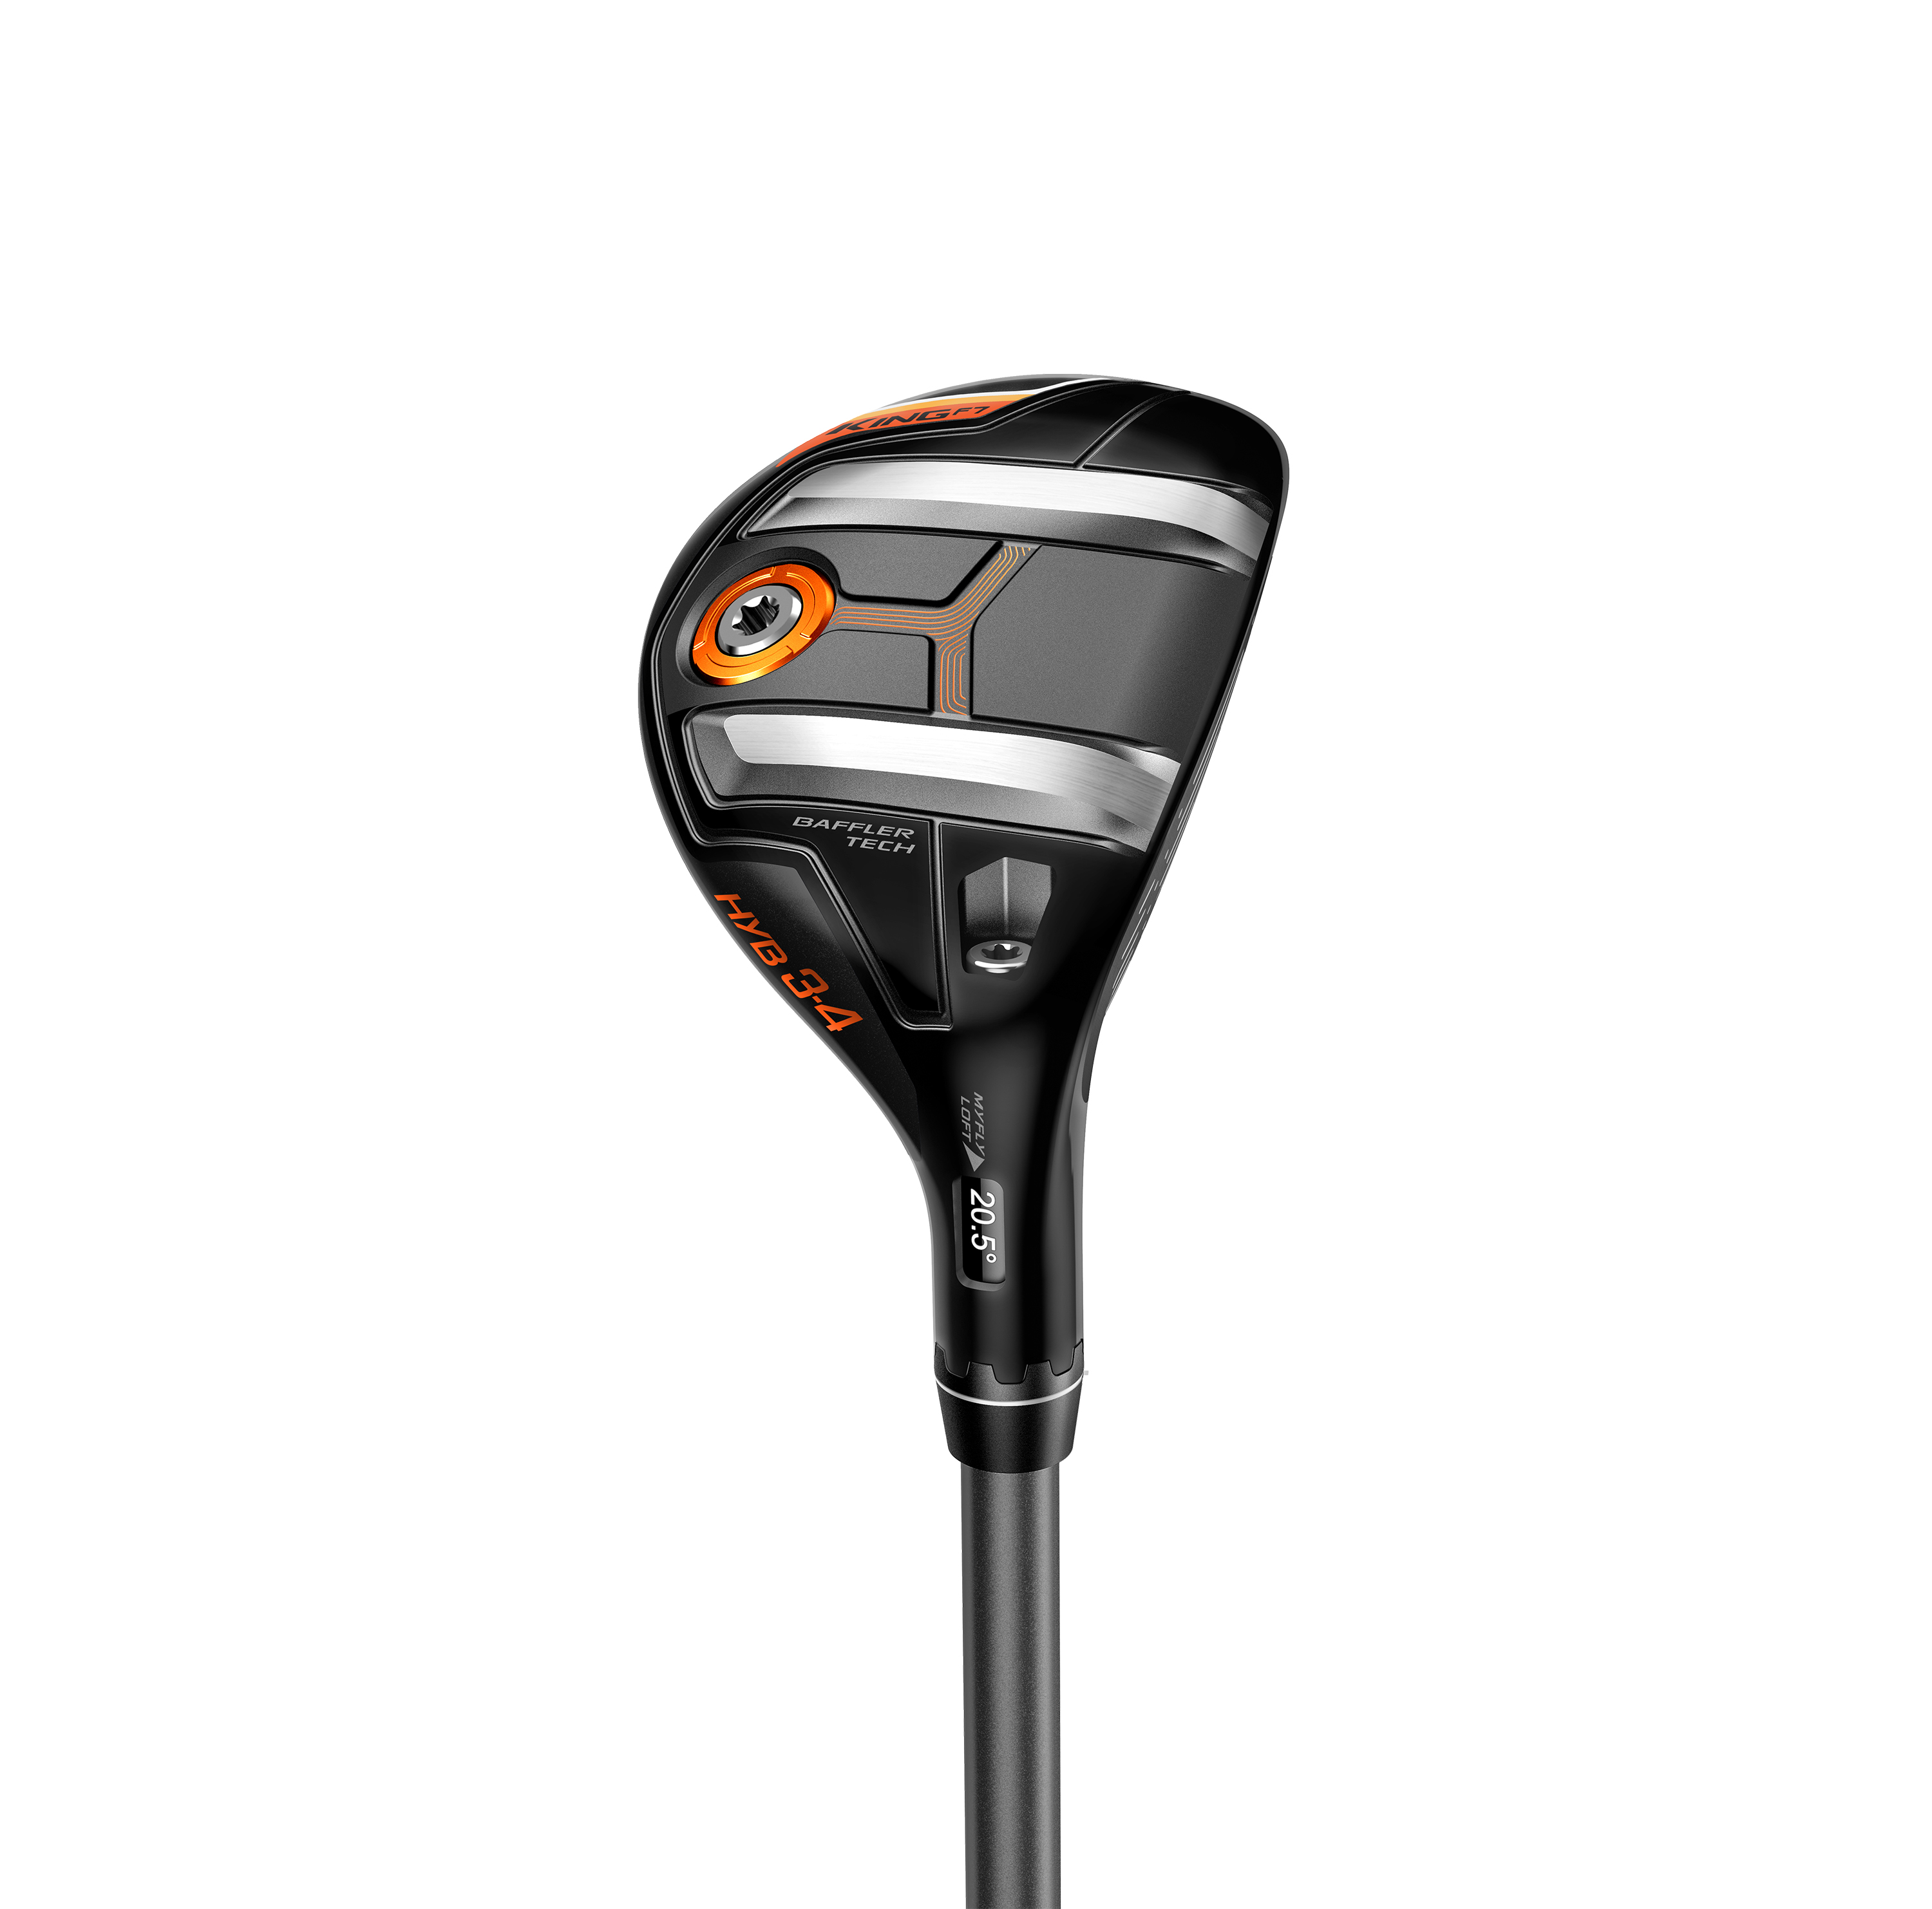 Cobra launches F7 fairways and hybrids